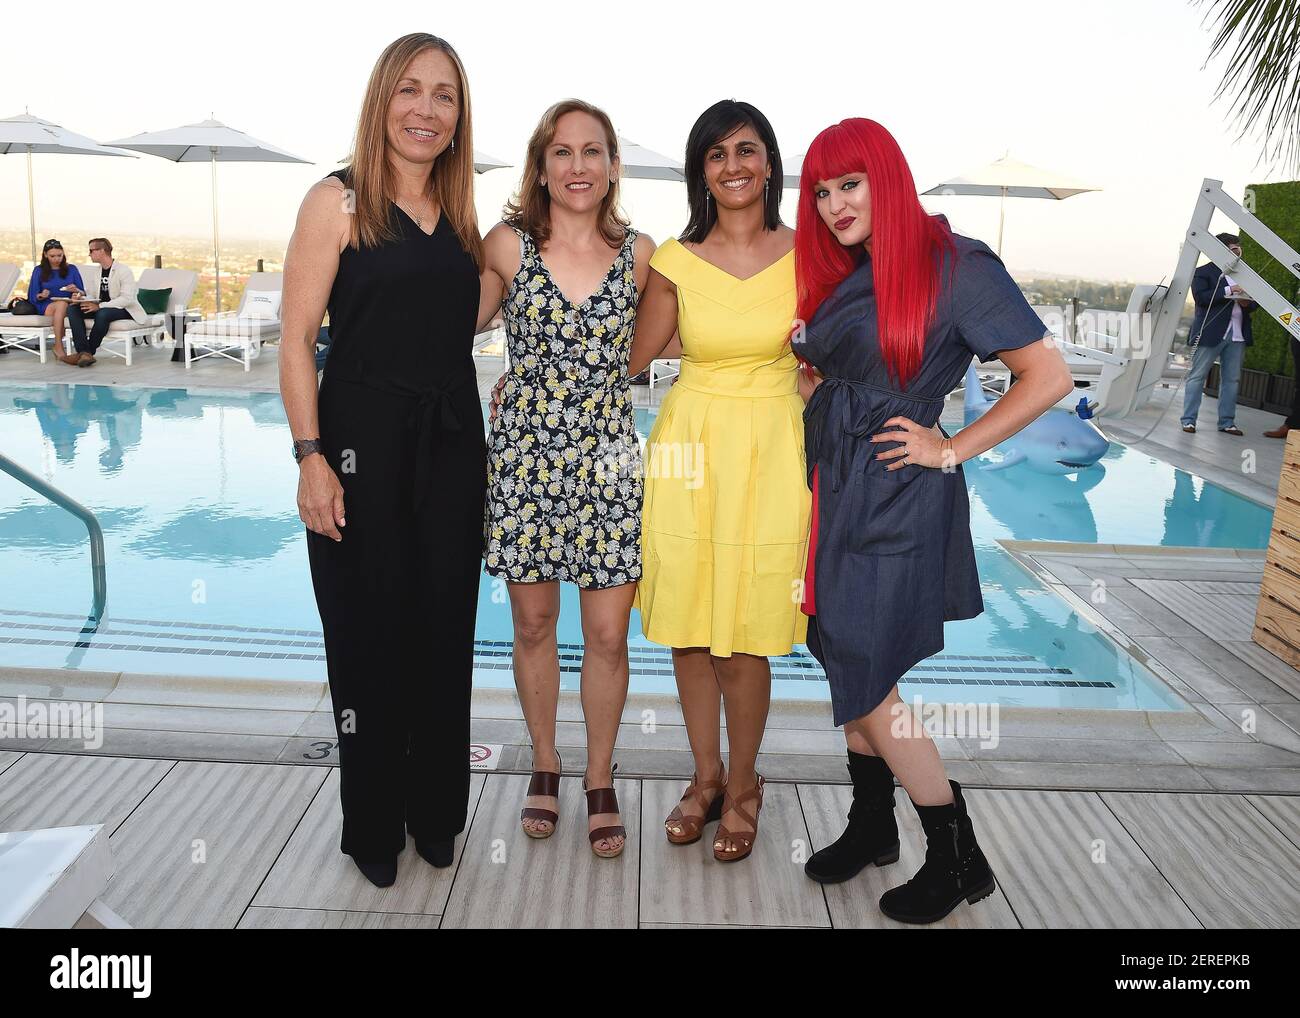 Authorization maternal today BEVERLY HILLS - JULY 24: Dr. Michelle Oakley, Dr. Susan Kelleher, Dr. Priya  Bapodra-Villaverde and Kaylee Greer at National Geographic's 'Summer TCA  Kickoff Party' at The Rooftop by JG at the Waldorf